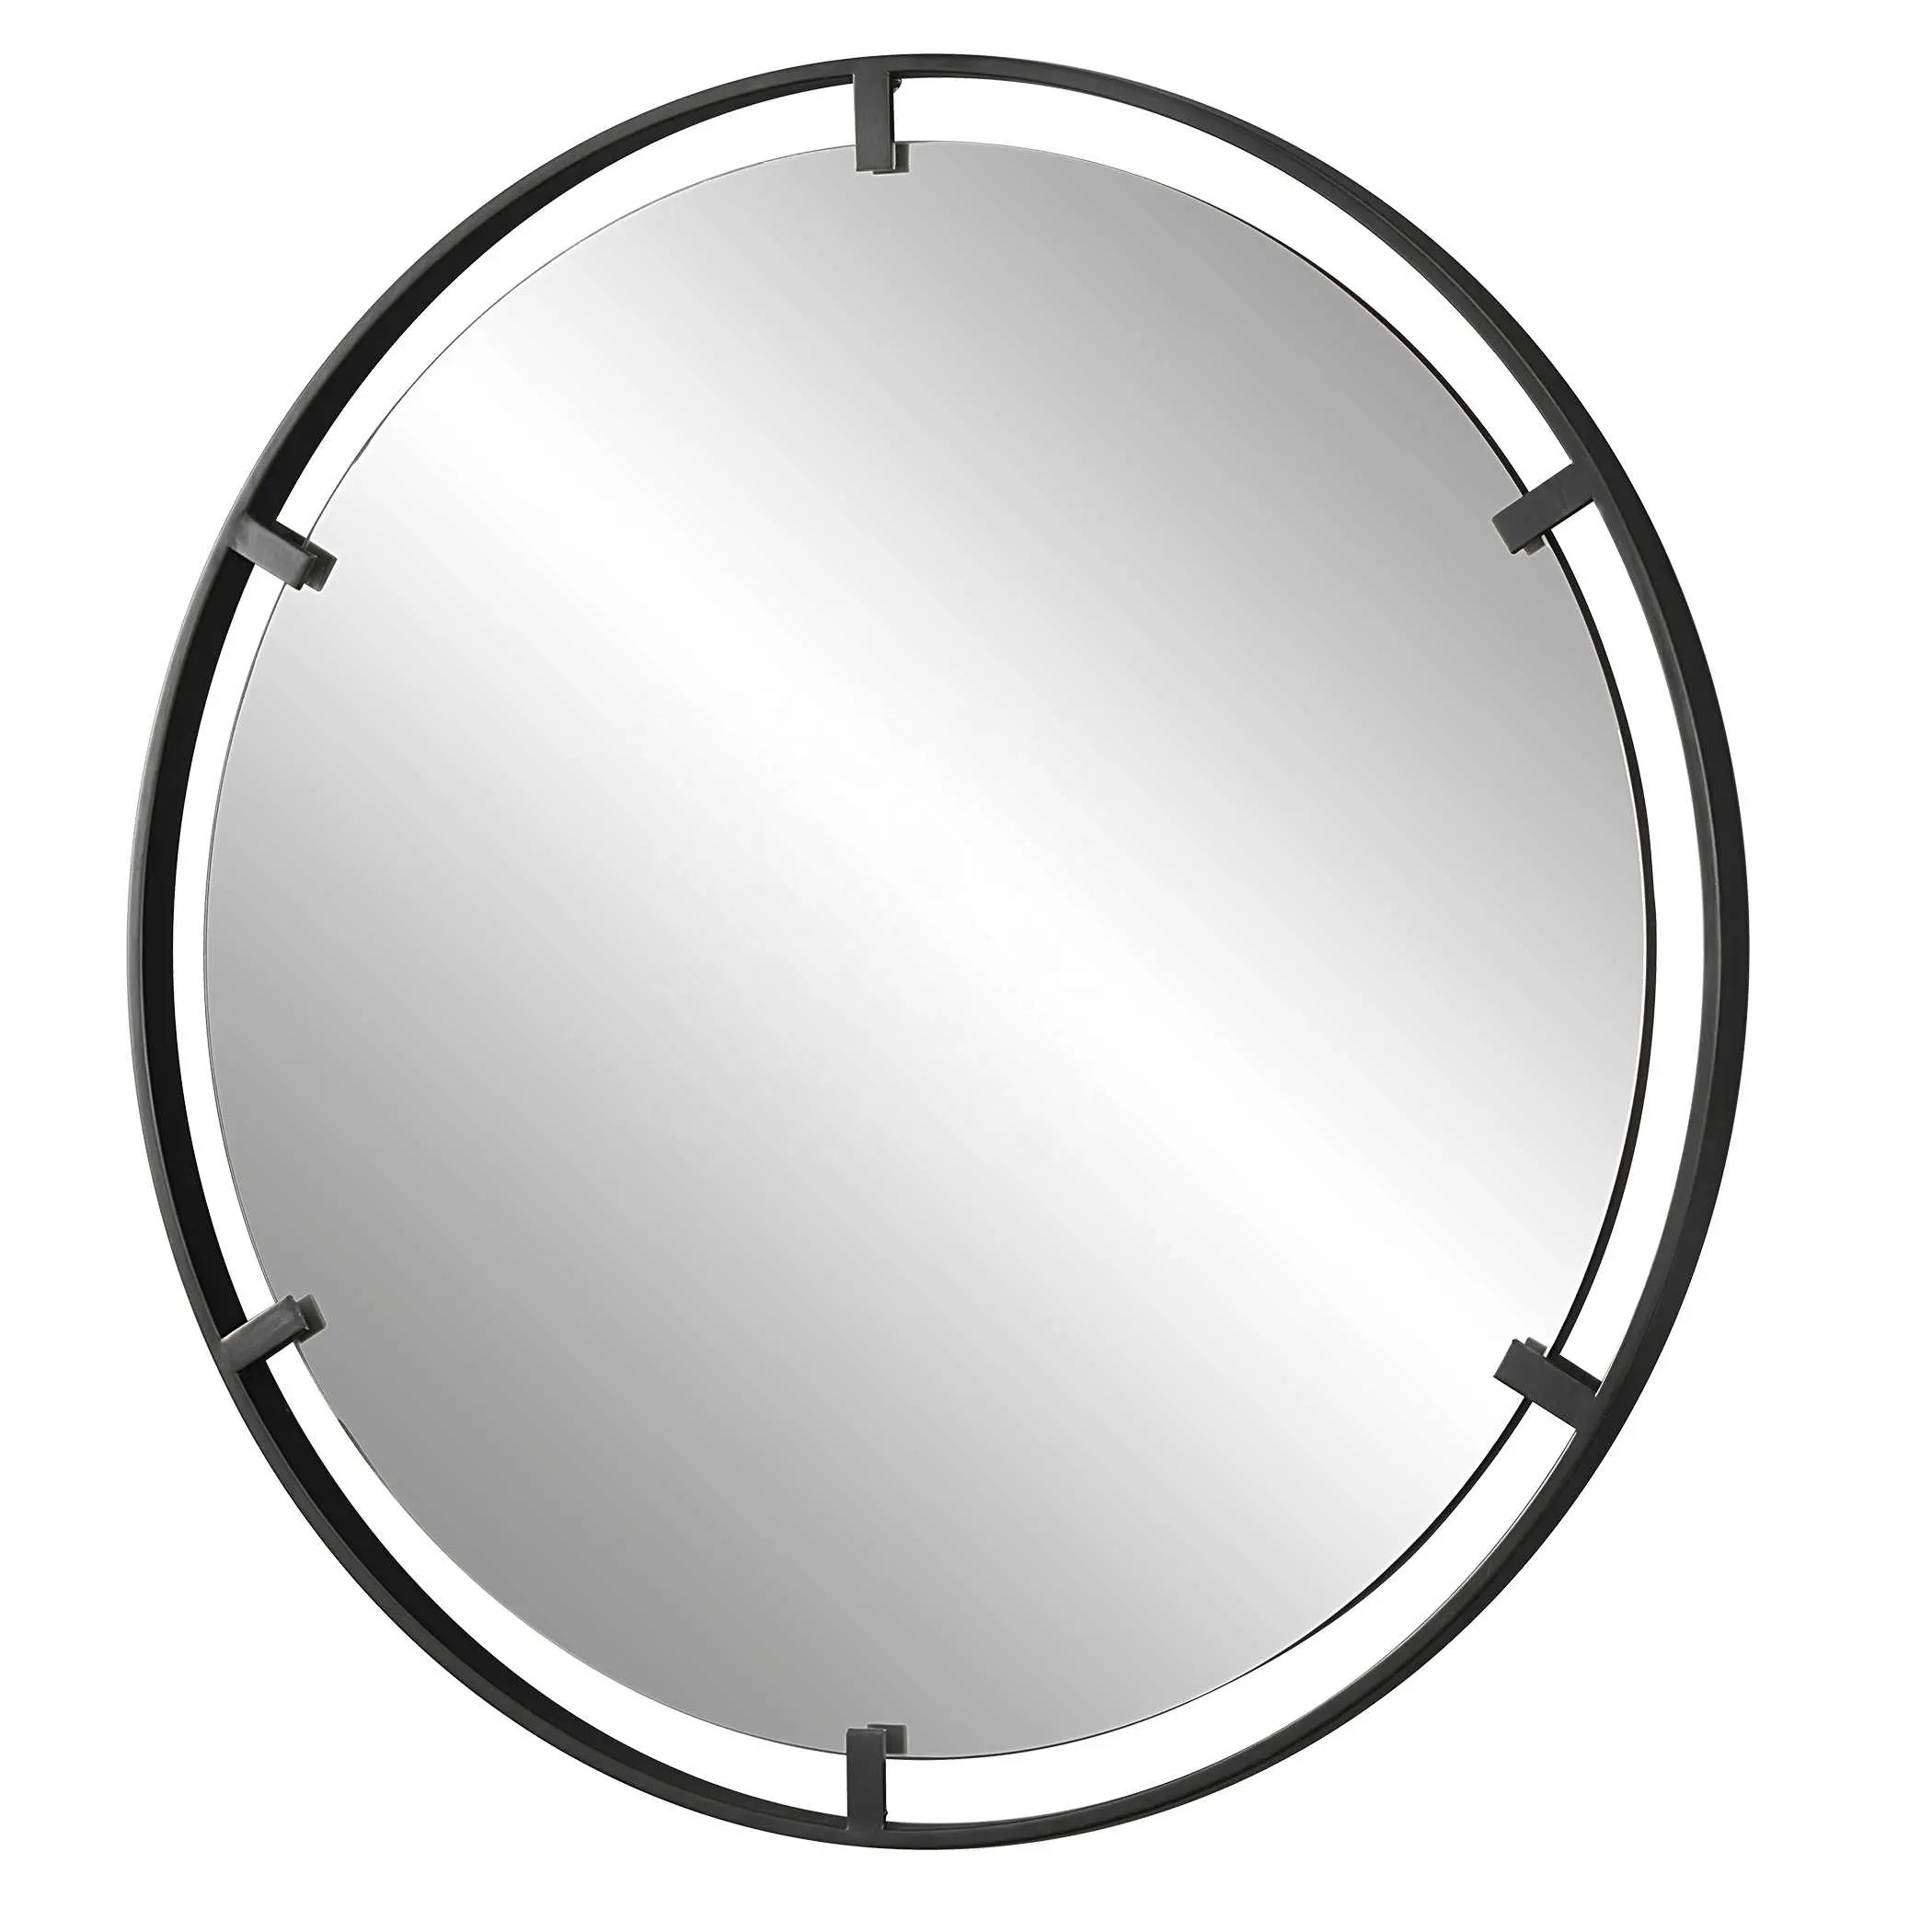 Simple design round shape black color with Metal frame Wall Mirror Decorative mirror for home style living room